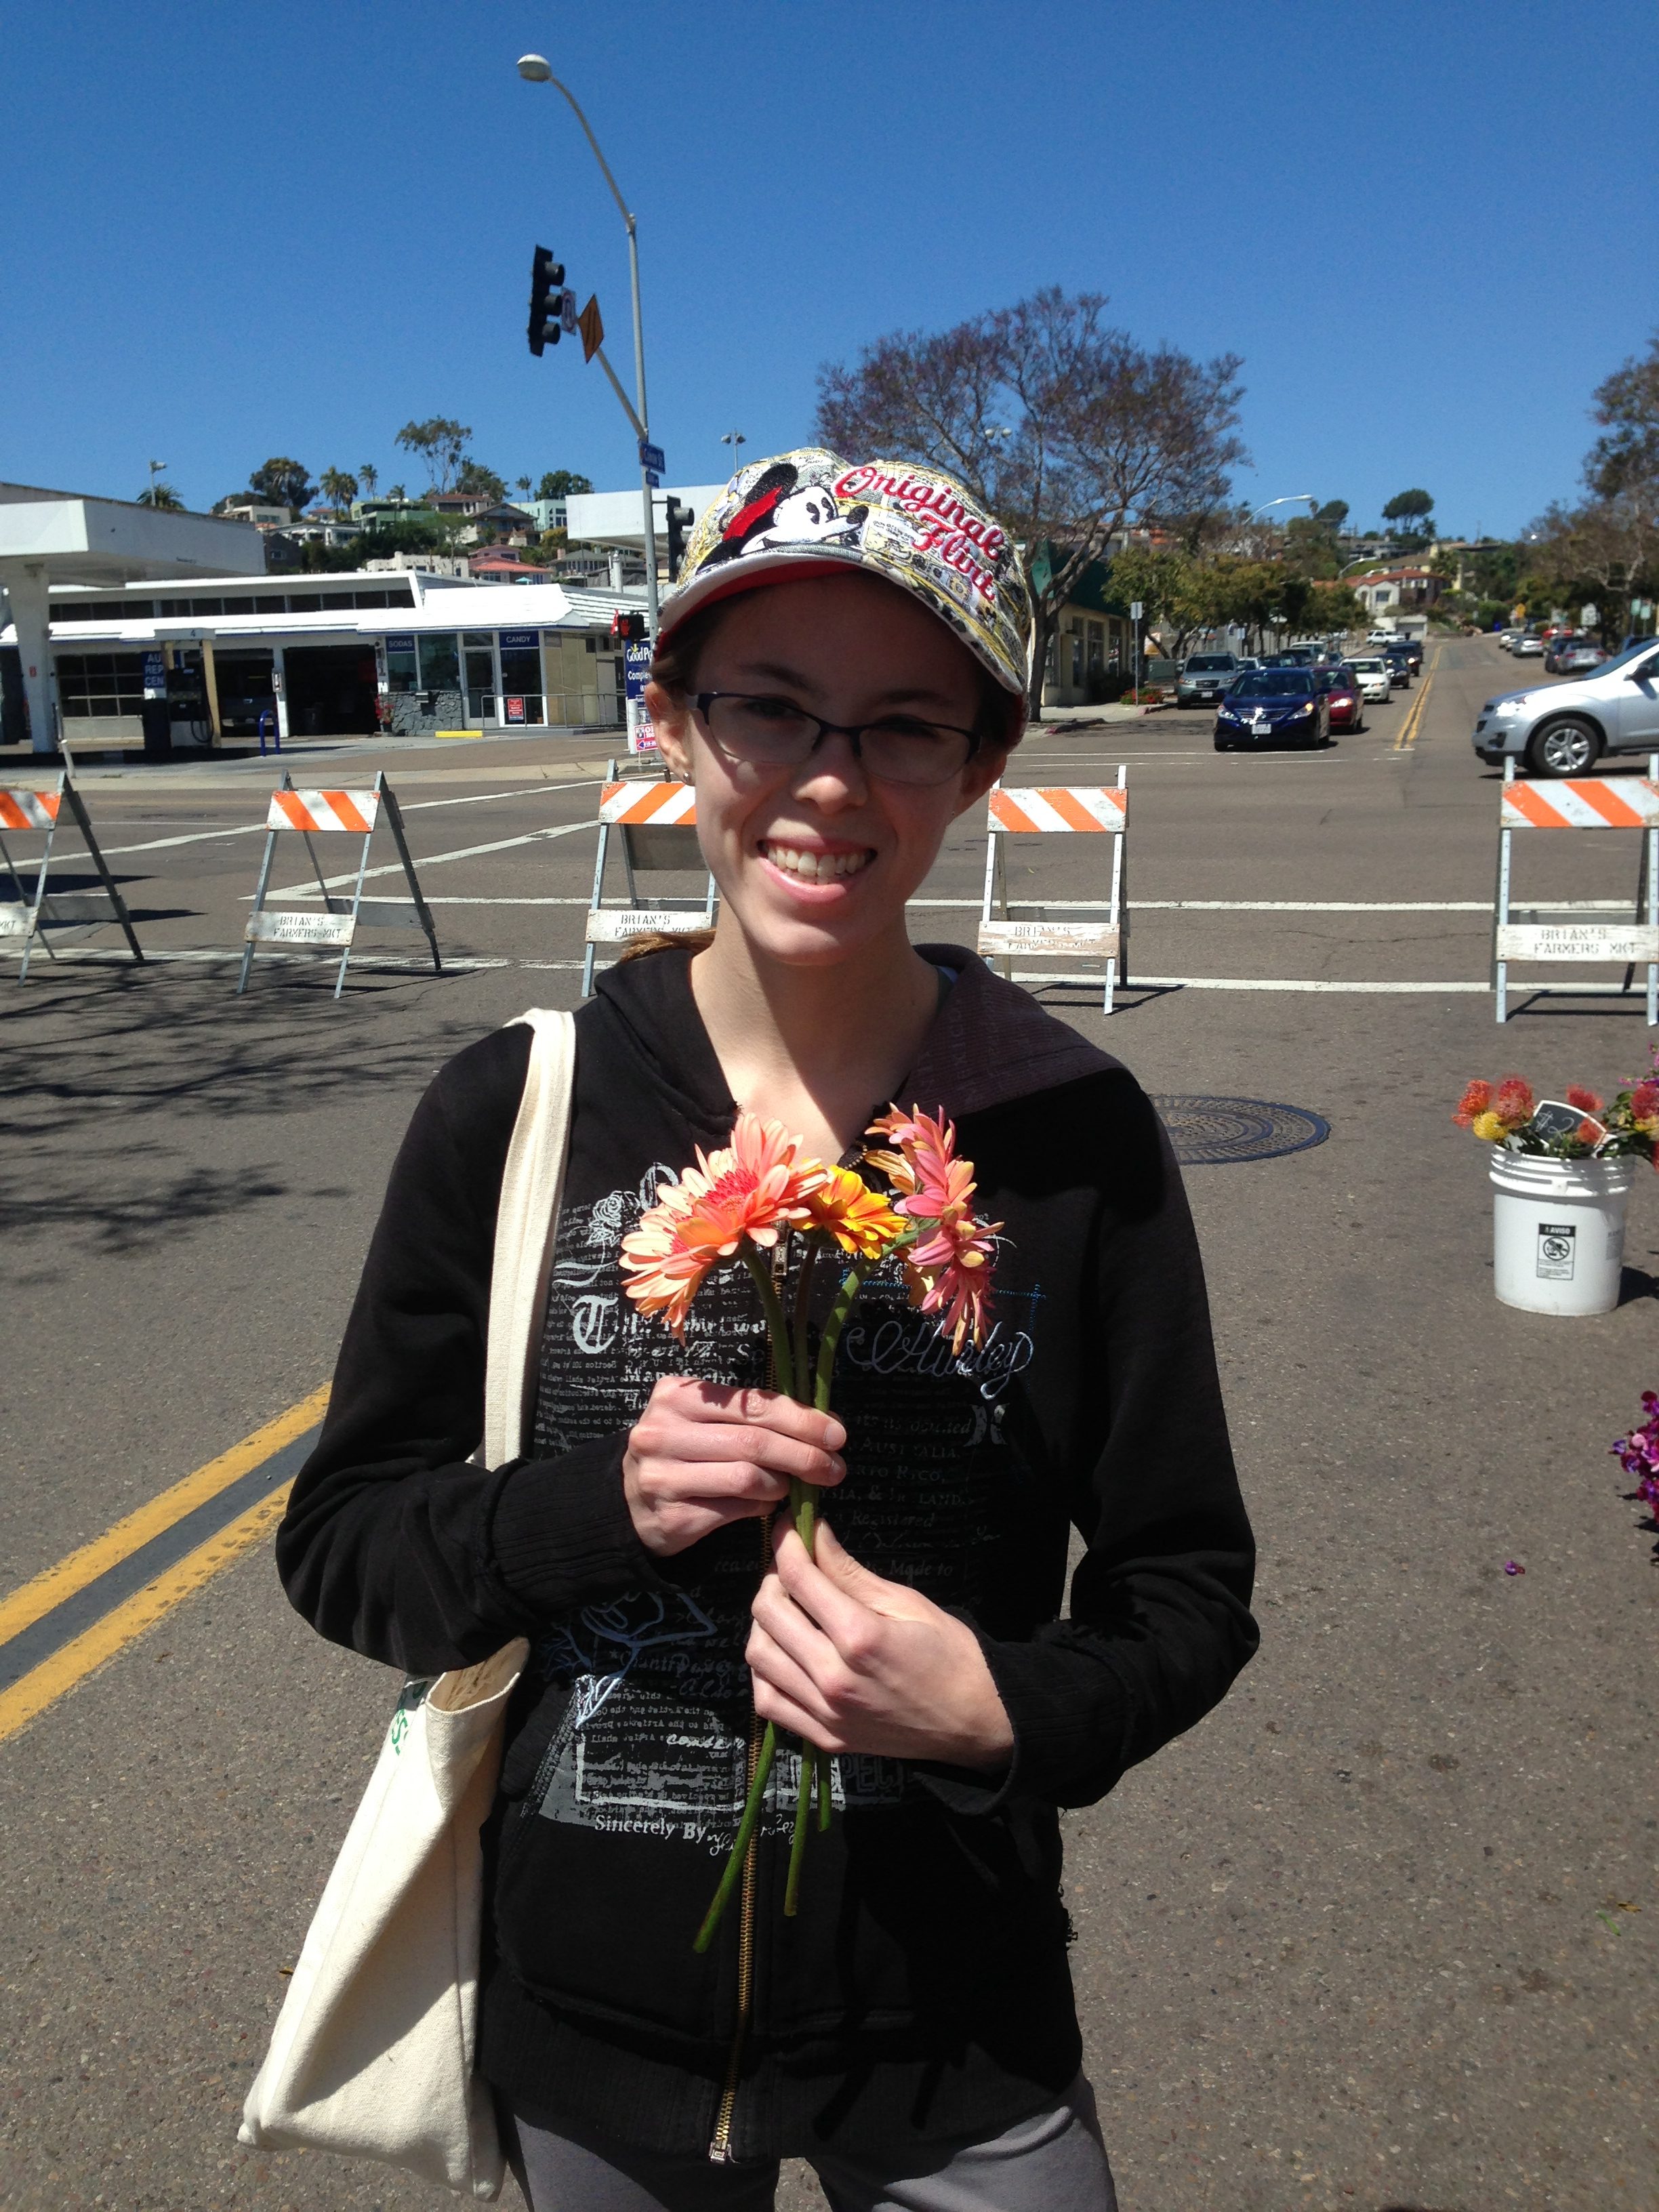 young woman wearing a hat and standing in a parking lot holding flowers